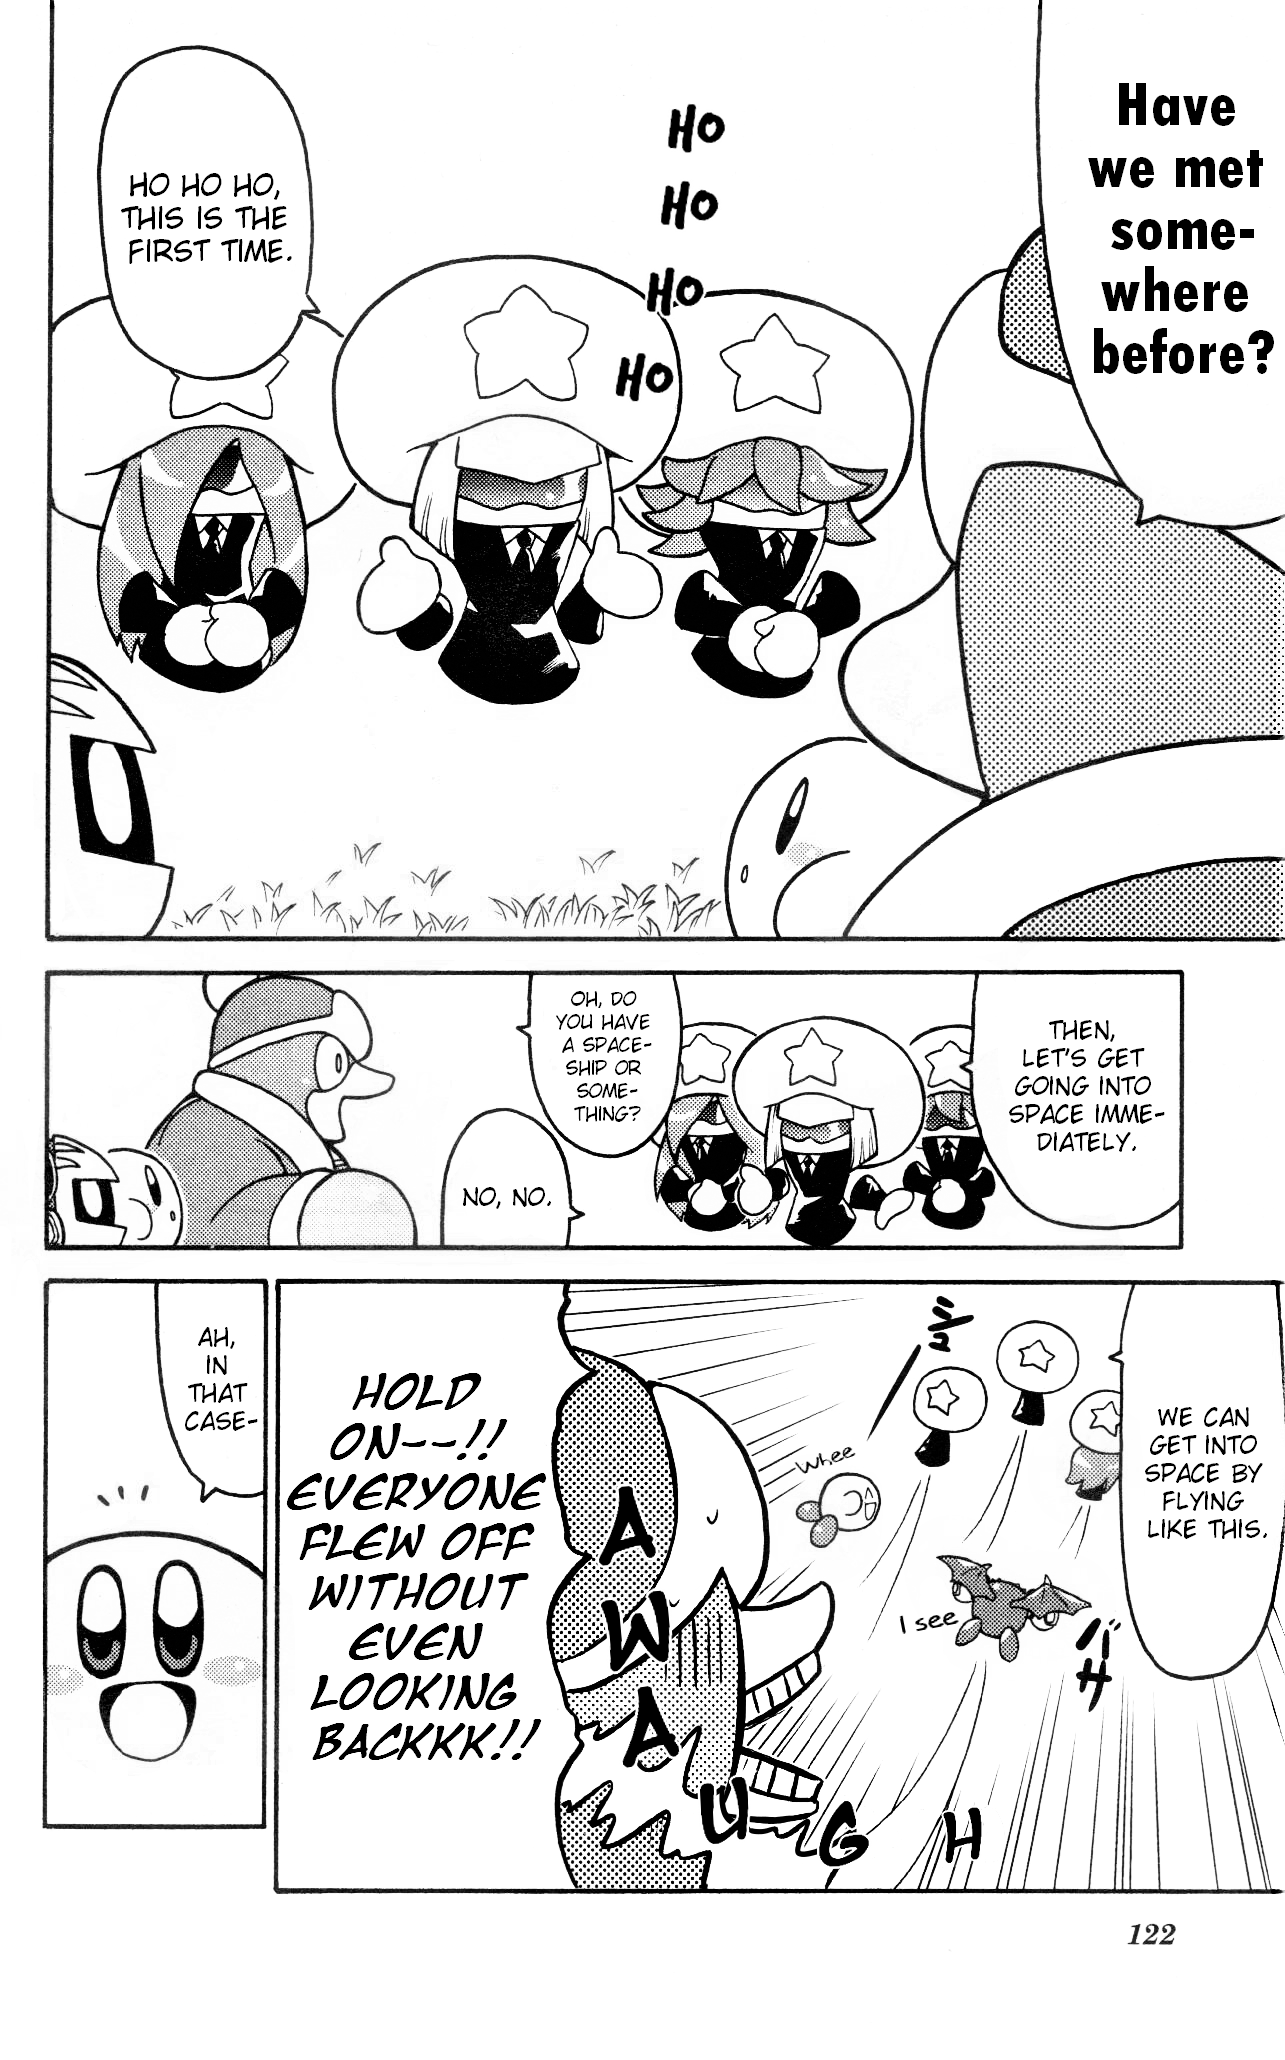 Kirby Of The Stars: Daily Round Diary! Vol.2 Chapter 11: Just What The Doctor Ordered~! A Space Vacation!! - Picture 2